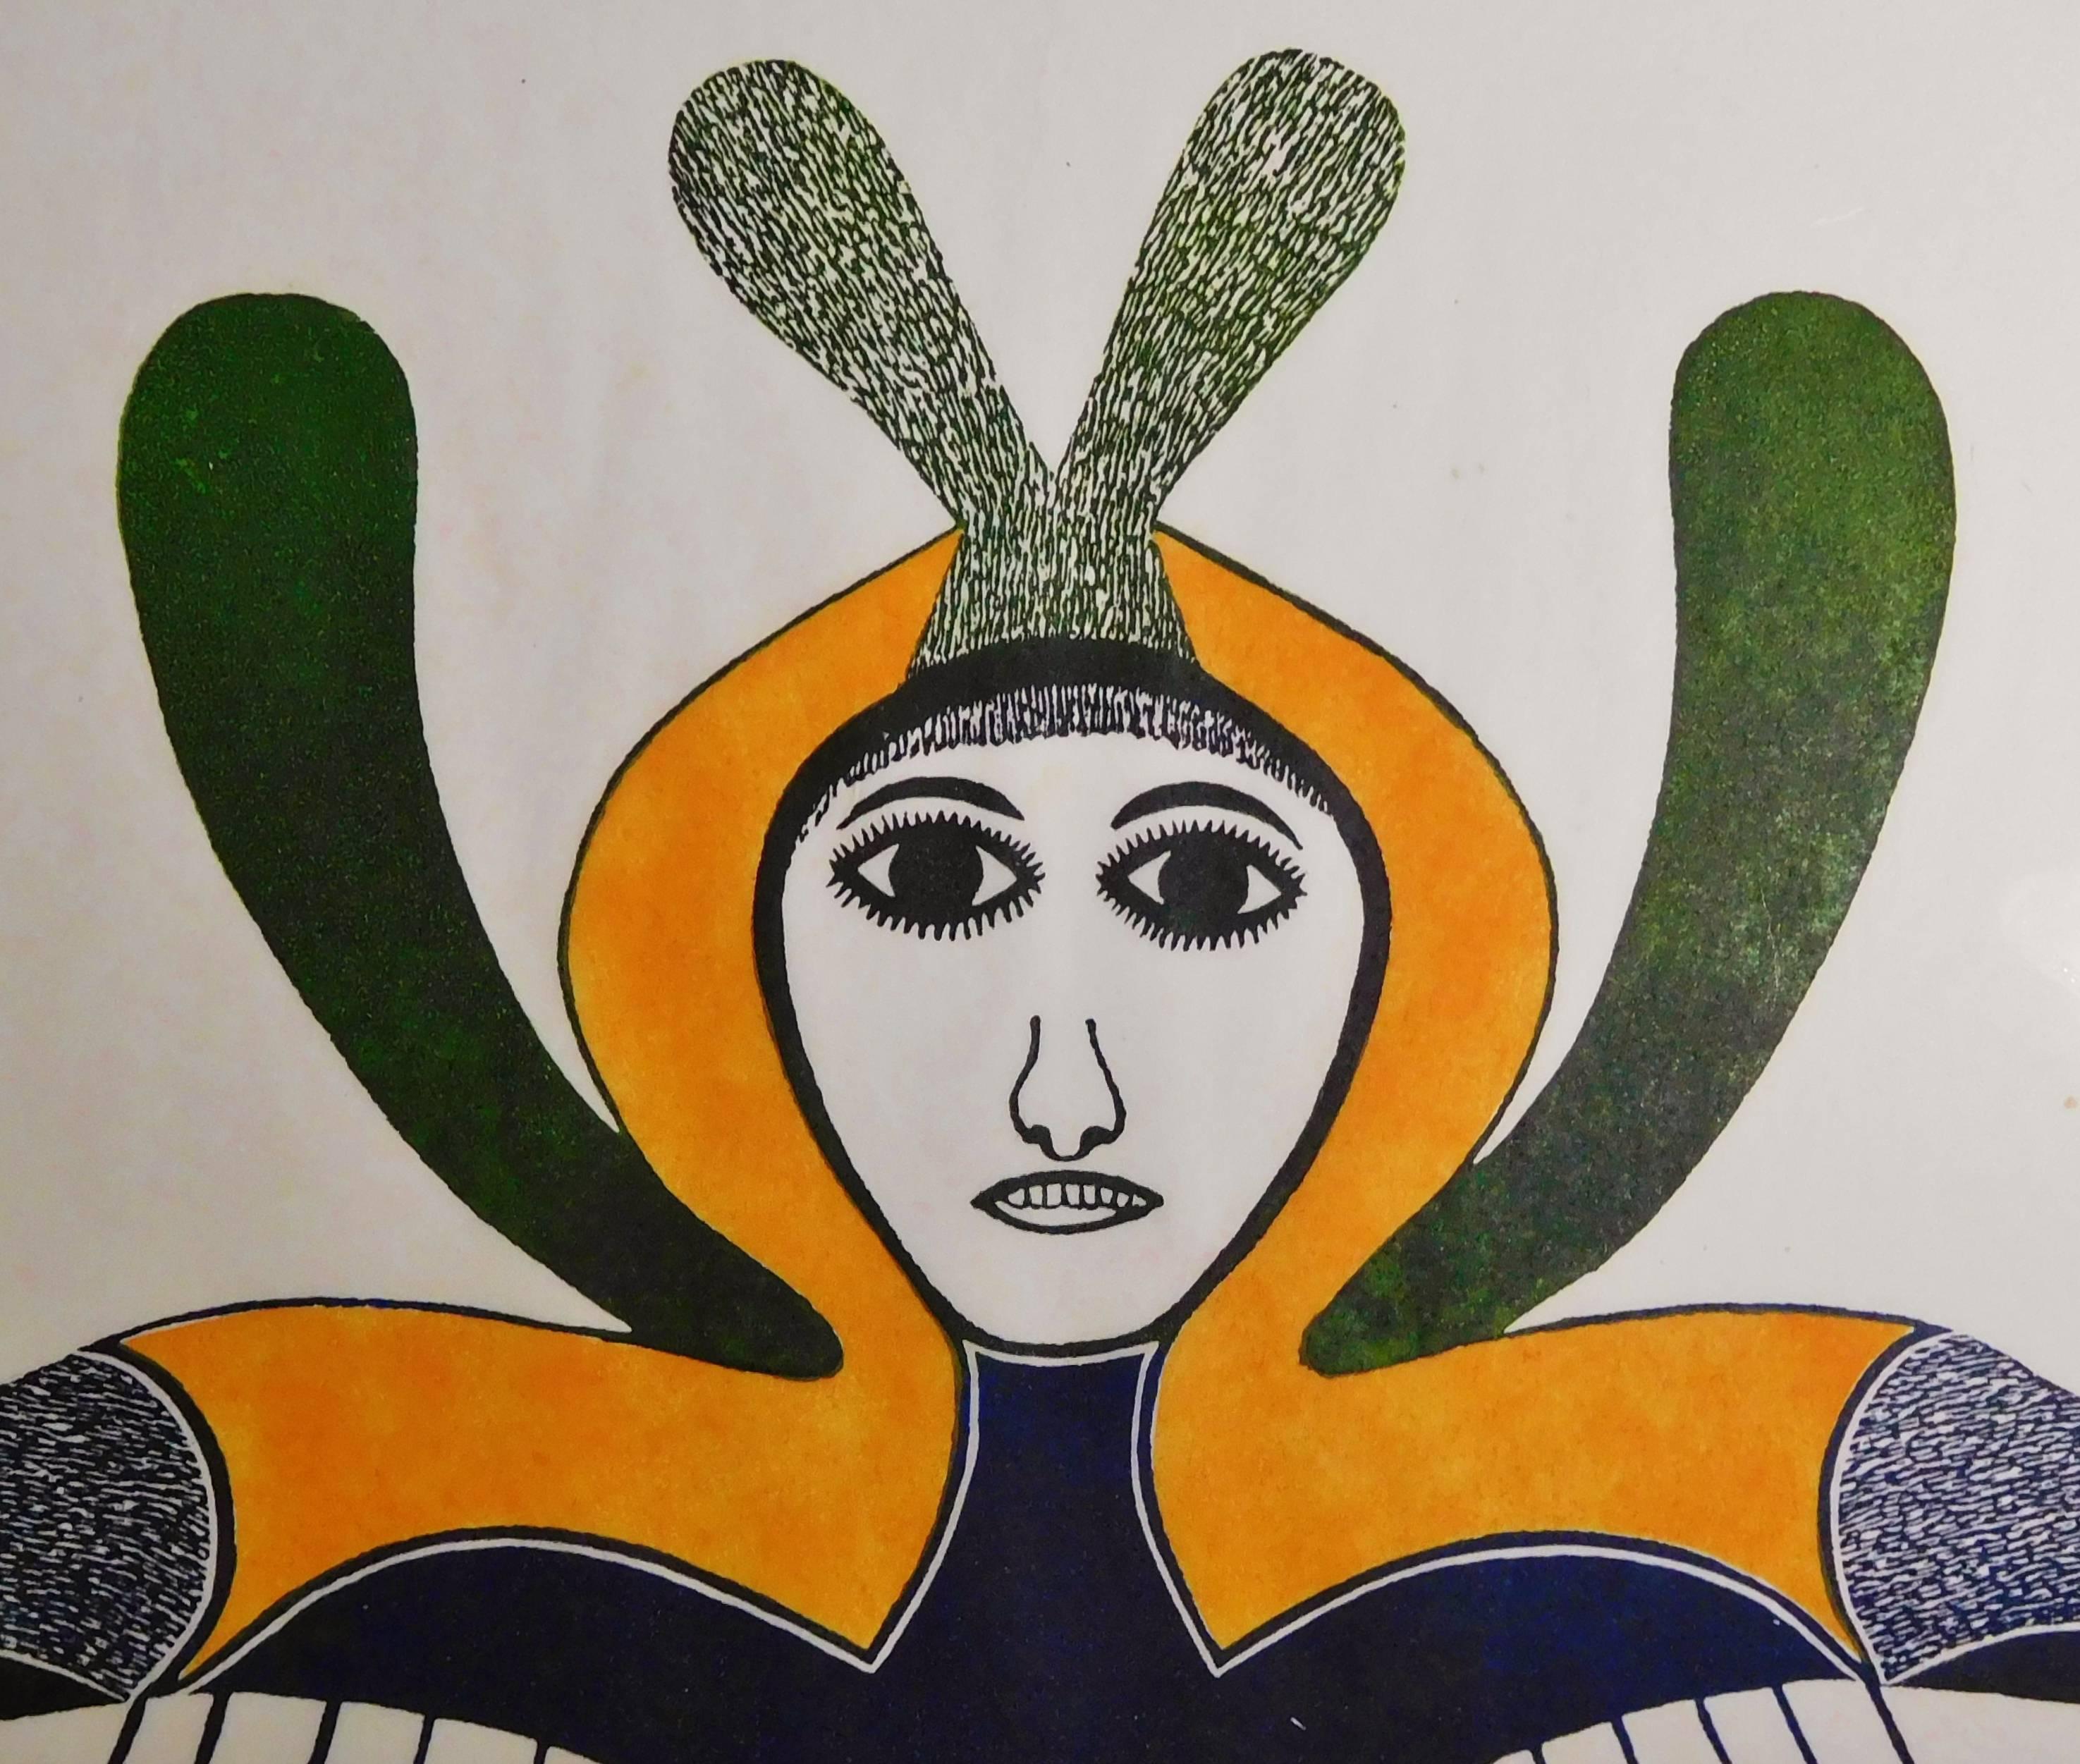 This vision of the Canadian artist Ningeeuga Oshuitoq (1918-1980) reflects the strong female spirit of the Inuit woman and her closeness with Nature and the spirit world.

This limited edition stonecut and stencil print is #13 of 50 from the 1979